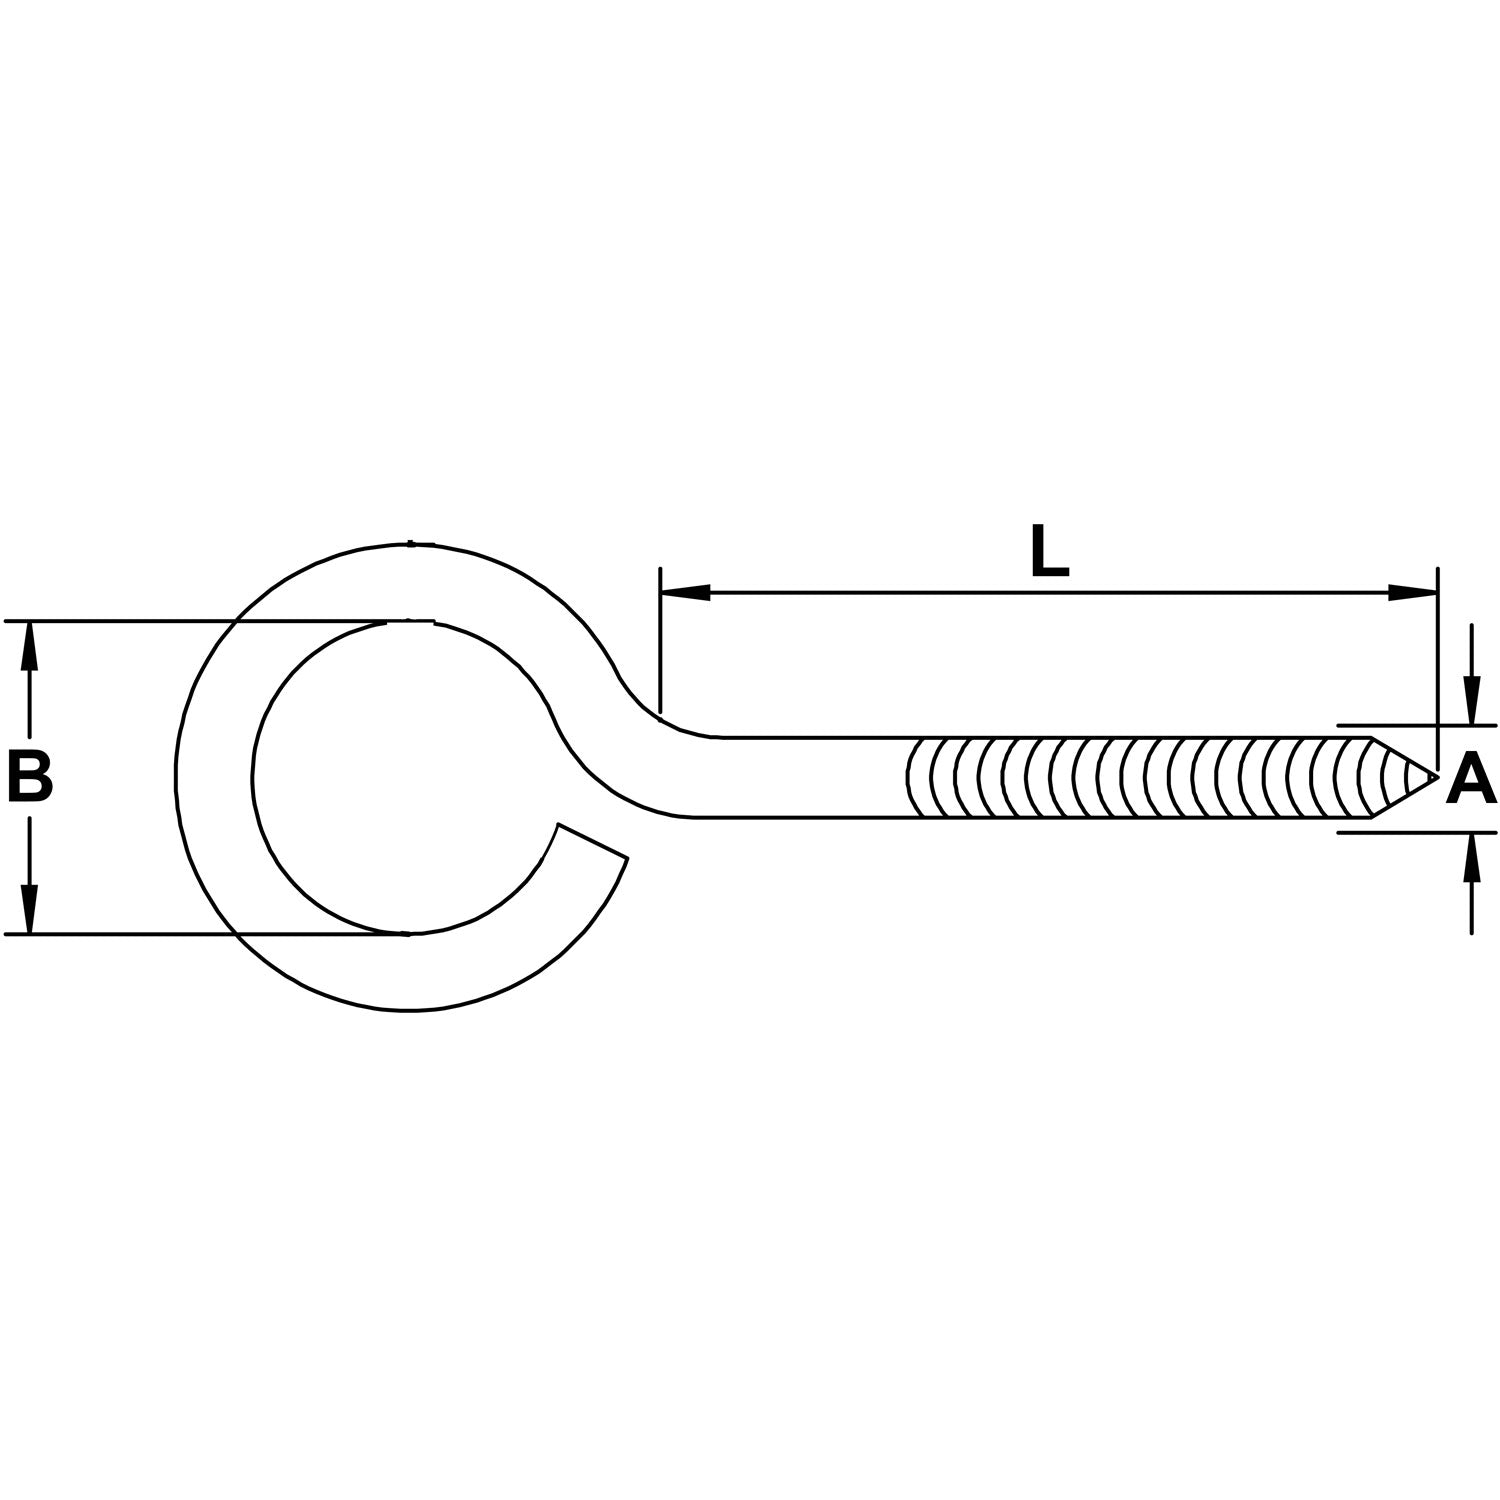 five-sixteenths-inch-x-five-inch-stainless-lag-eye-bolt-specification-diagram